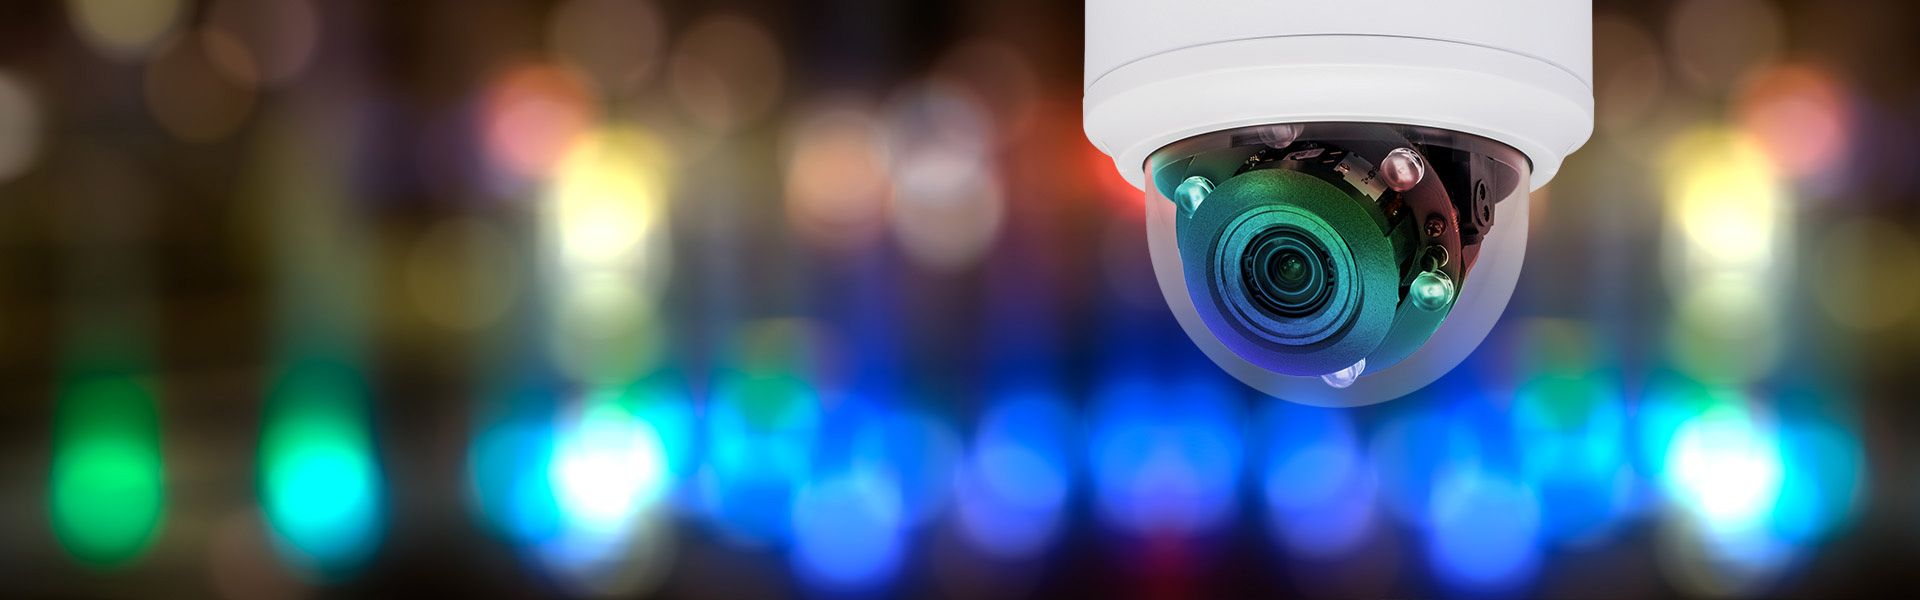 Night Vision on Security Cameras Explained - Casa Security